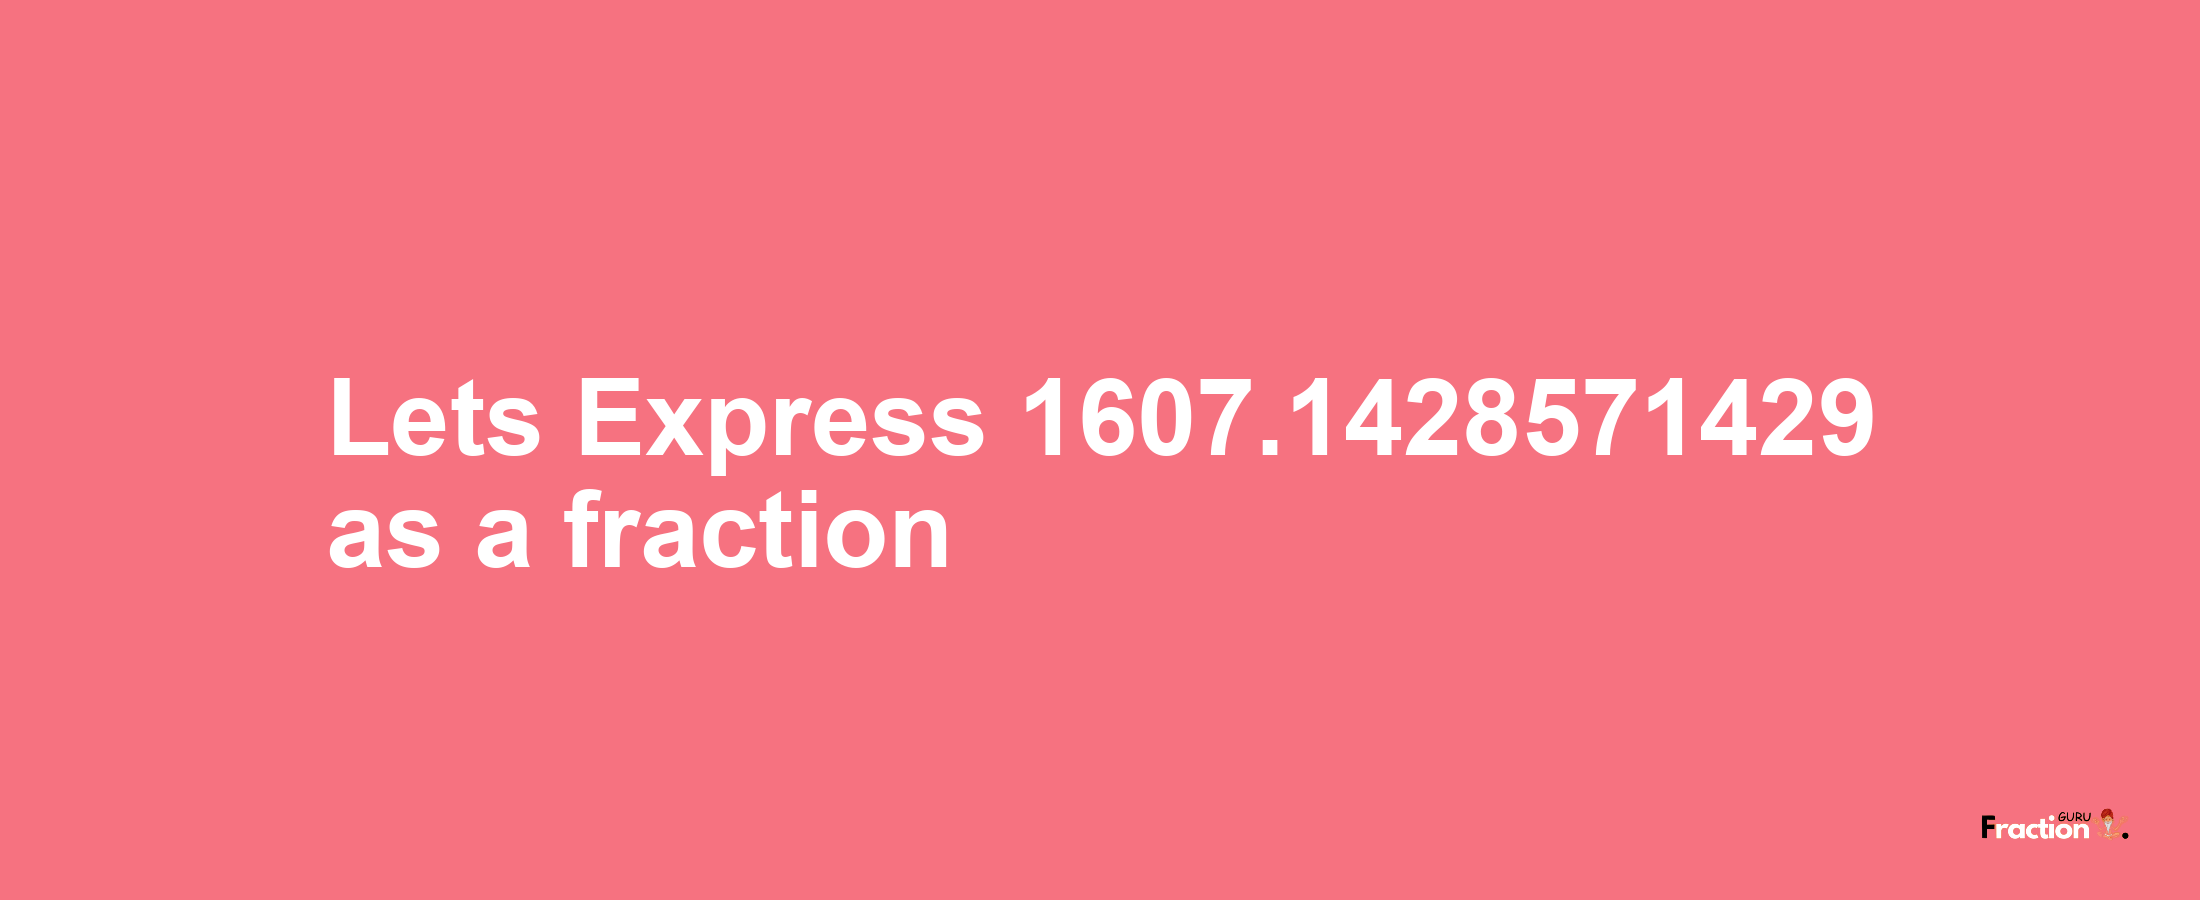 Lets Express 1607.1428571429 as afraction